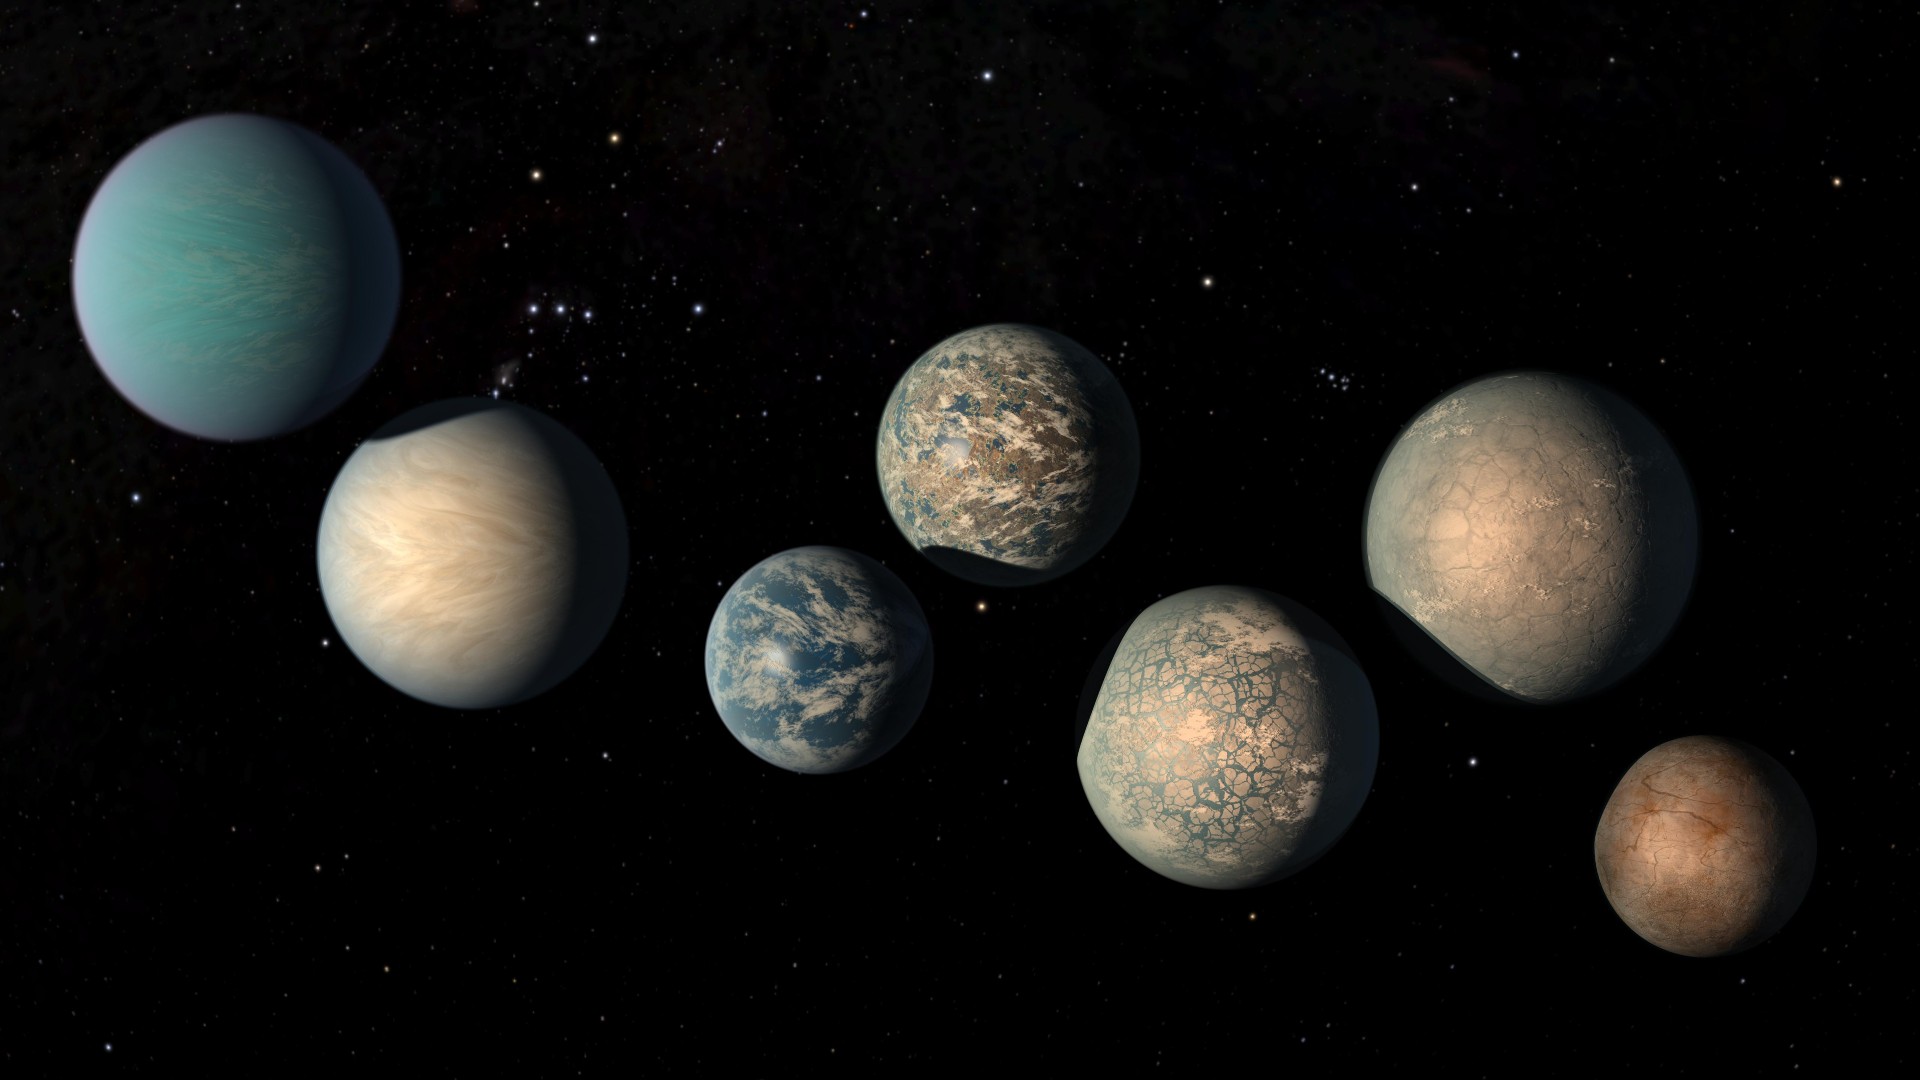 Illustration of the TRAPPIST-1 planets as of February 2018. There are 7 planets of similar sizes on a black background.